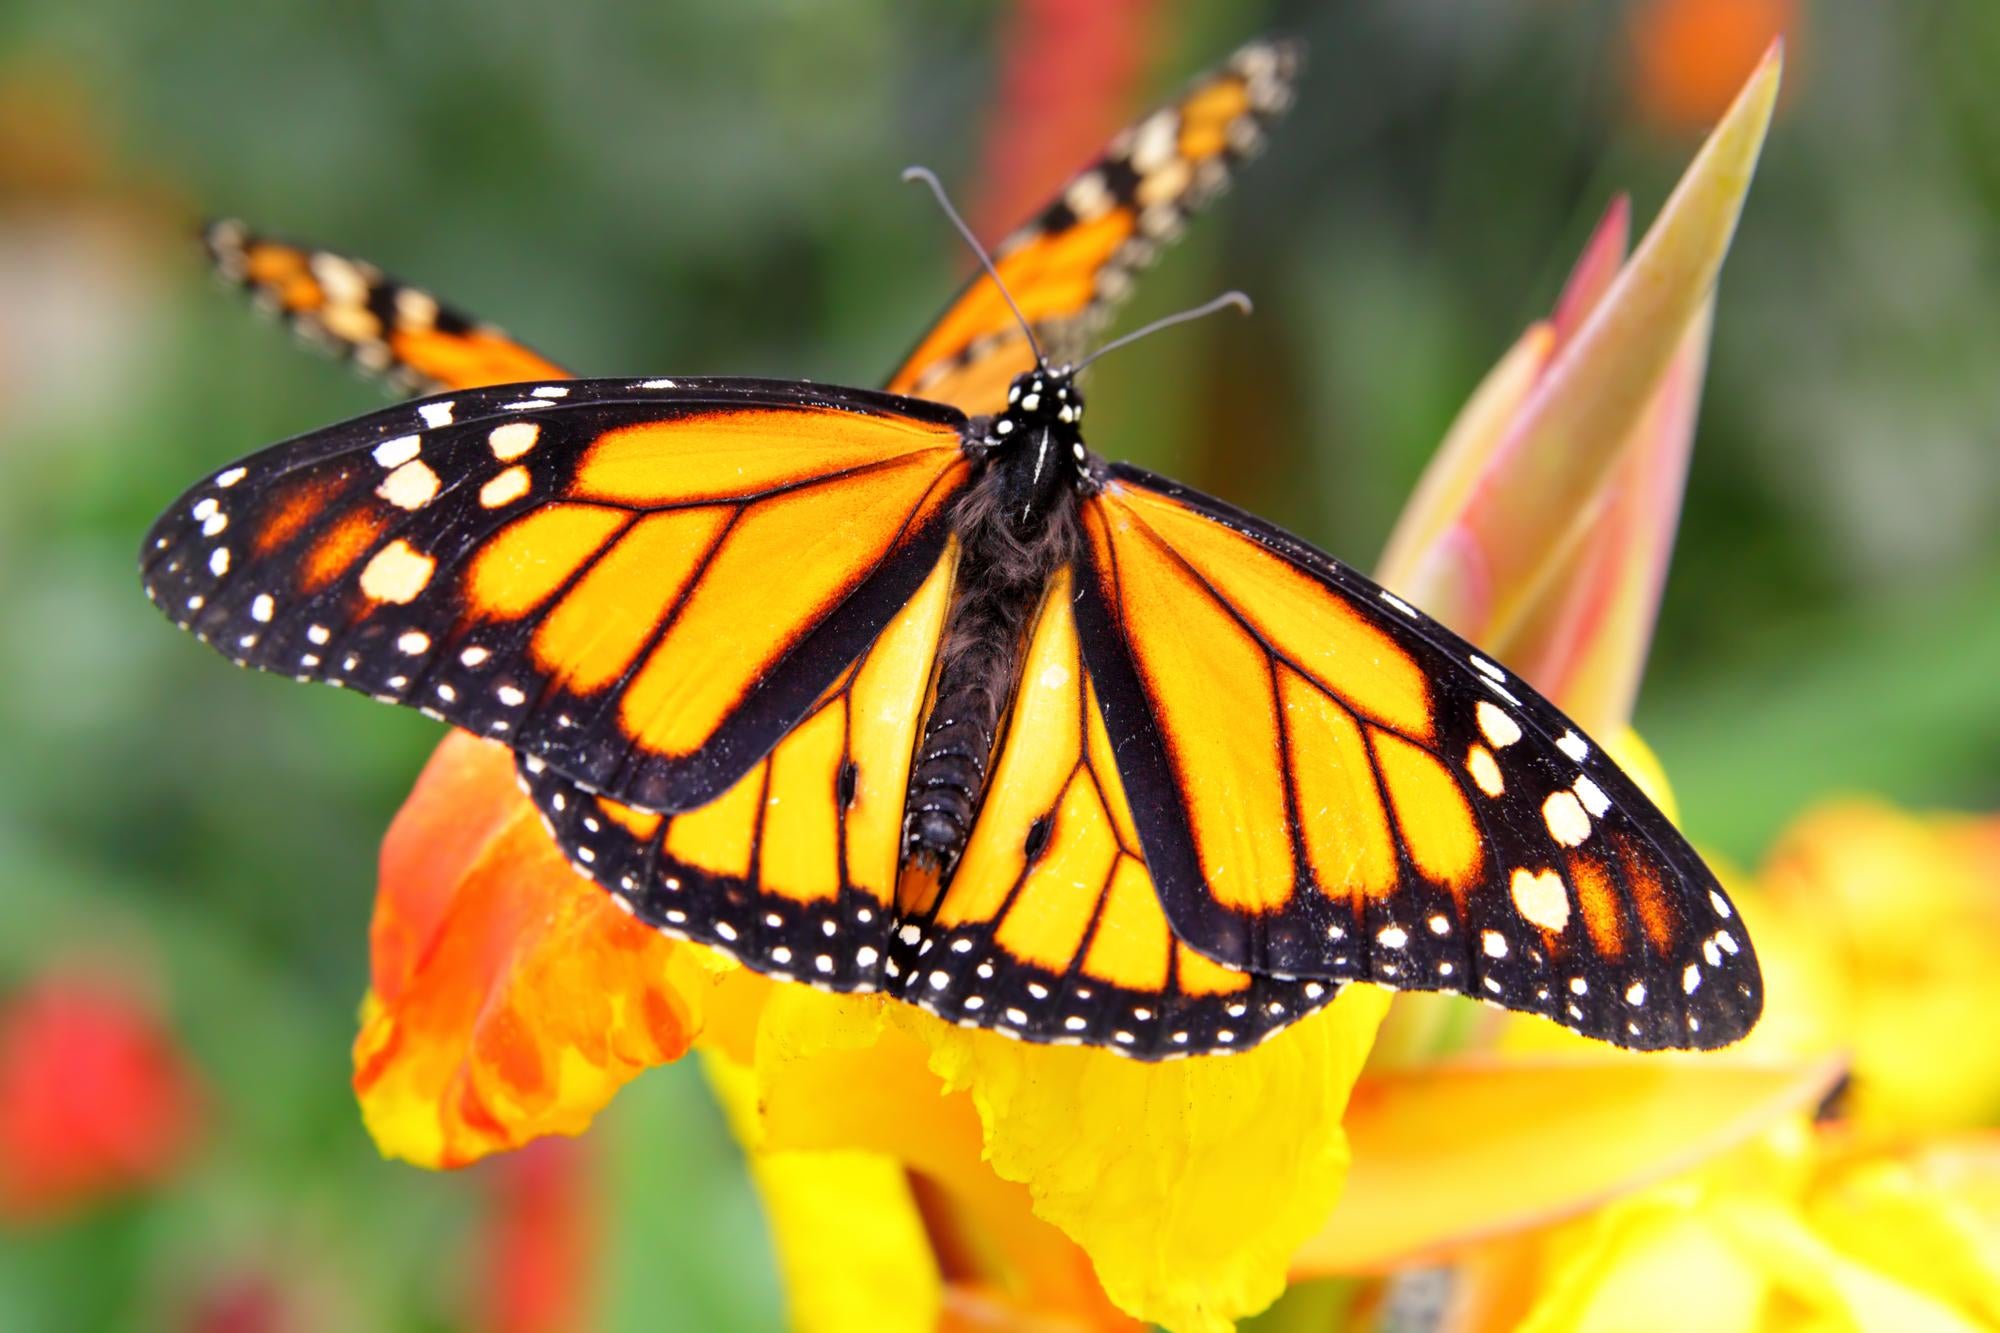 The Monarch Butterfly: A Remarkable Species and Key Pollinator in Need of Conservation